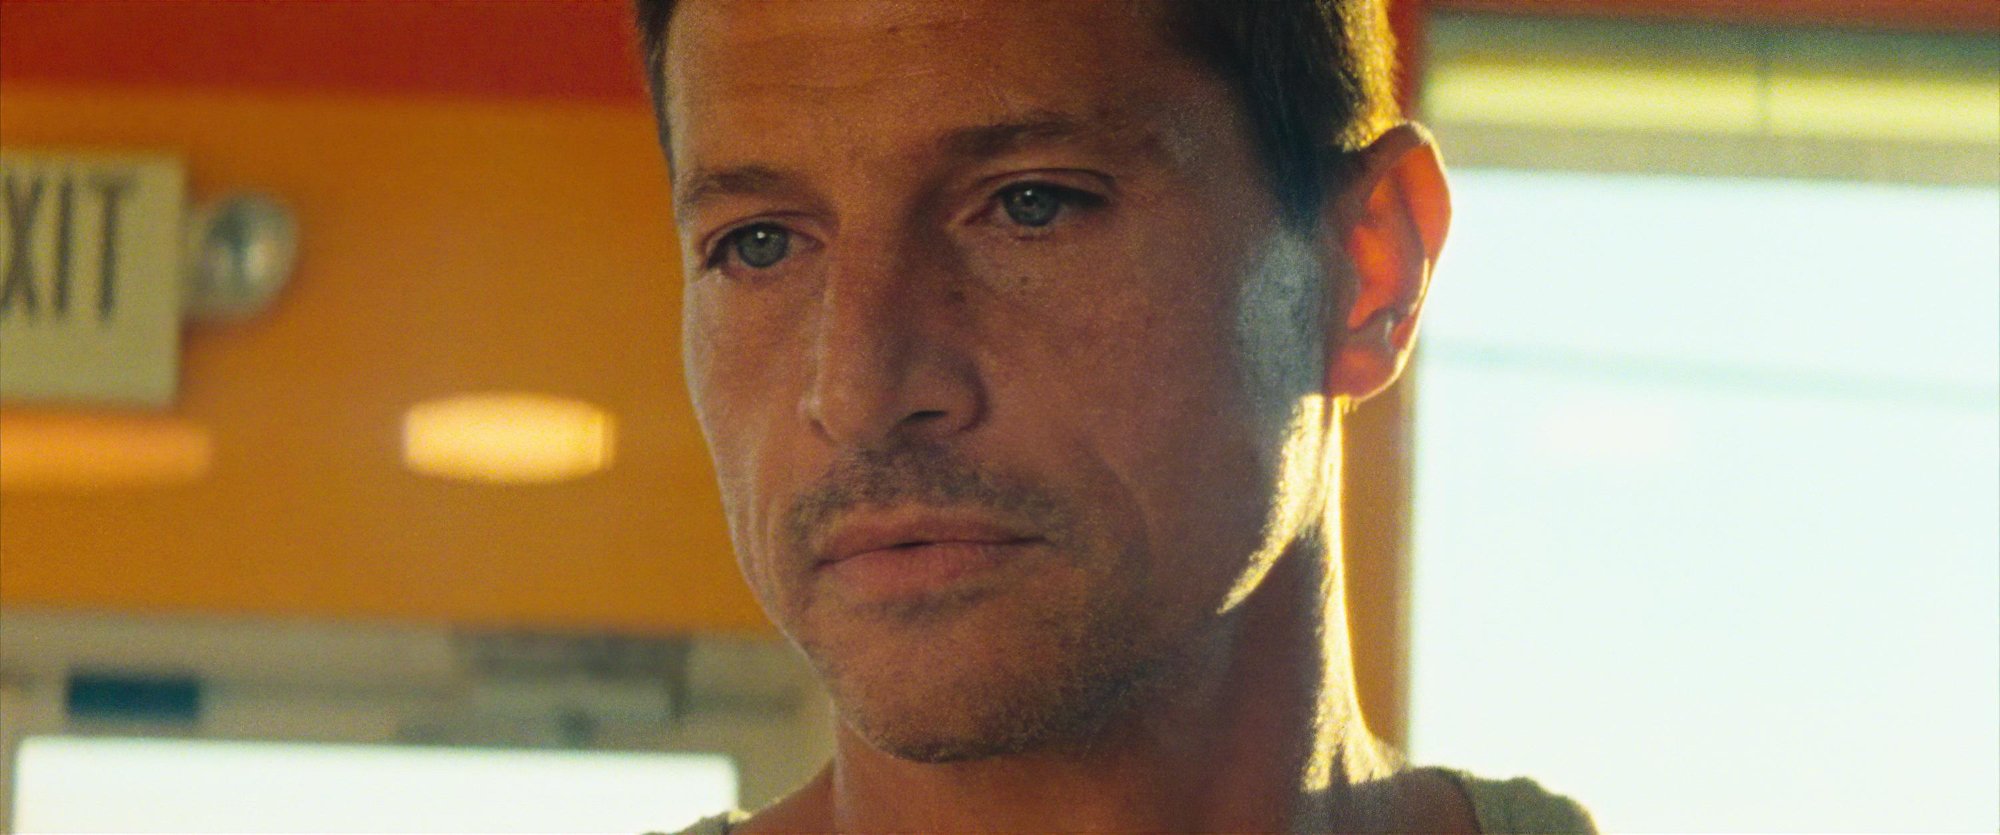 'Red Rocket' Simon Rex as Mikey Saber staring to the side